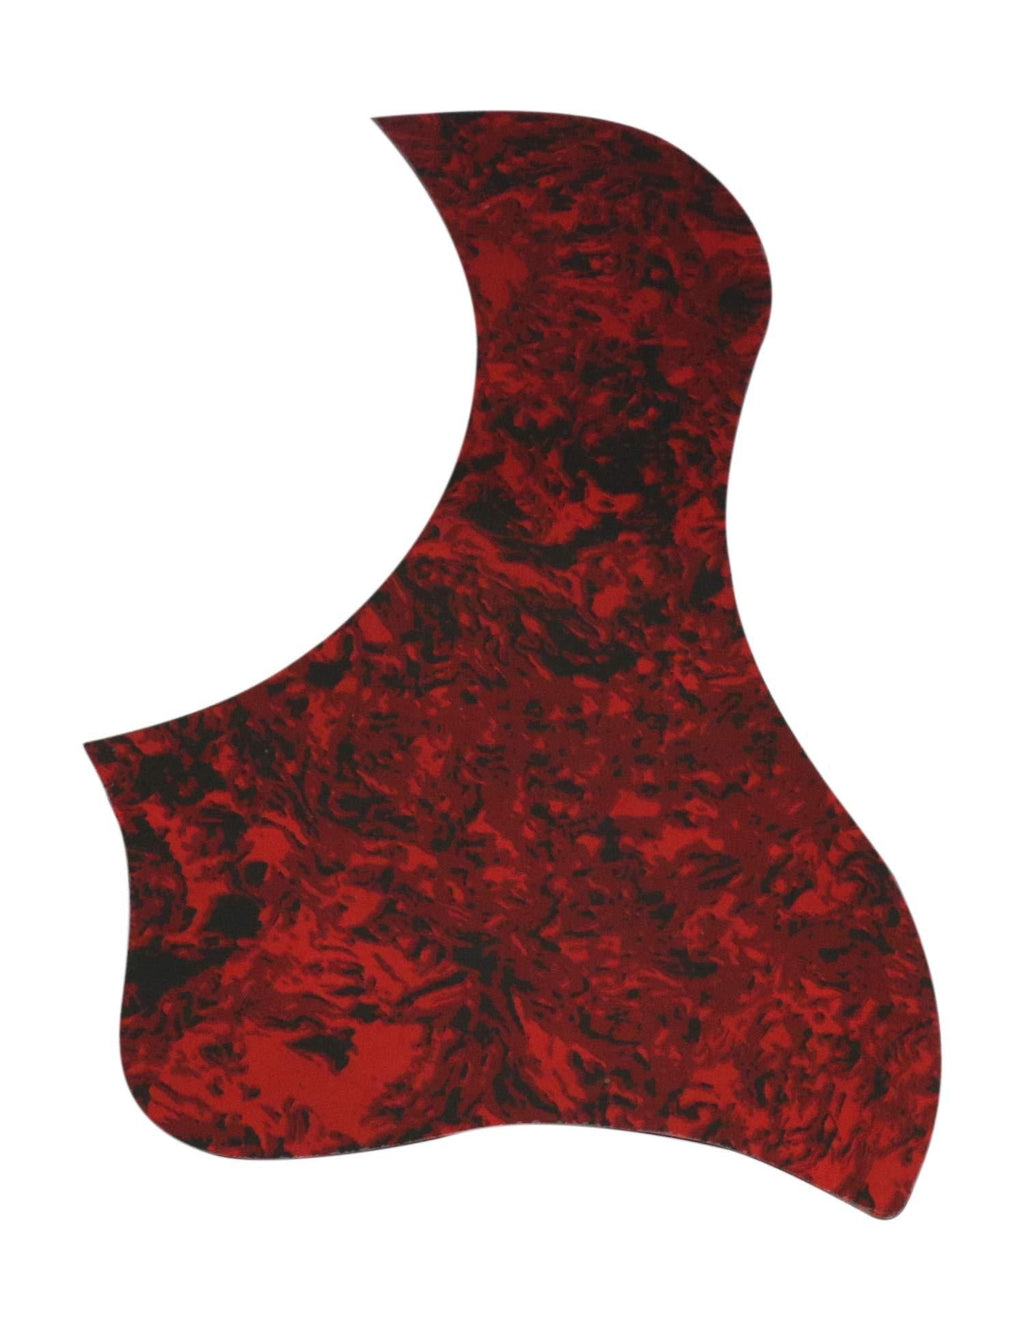 Metallor Acoustic Guitar Pickguard Anti-Scratch Guard Plate Self Adhesive Bird Shape Pick Guards Various Color, Cool Guitar Accessories Gifts. (Ghost Red) Ghost Red